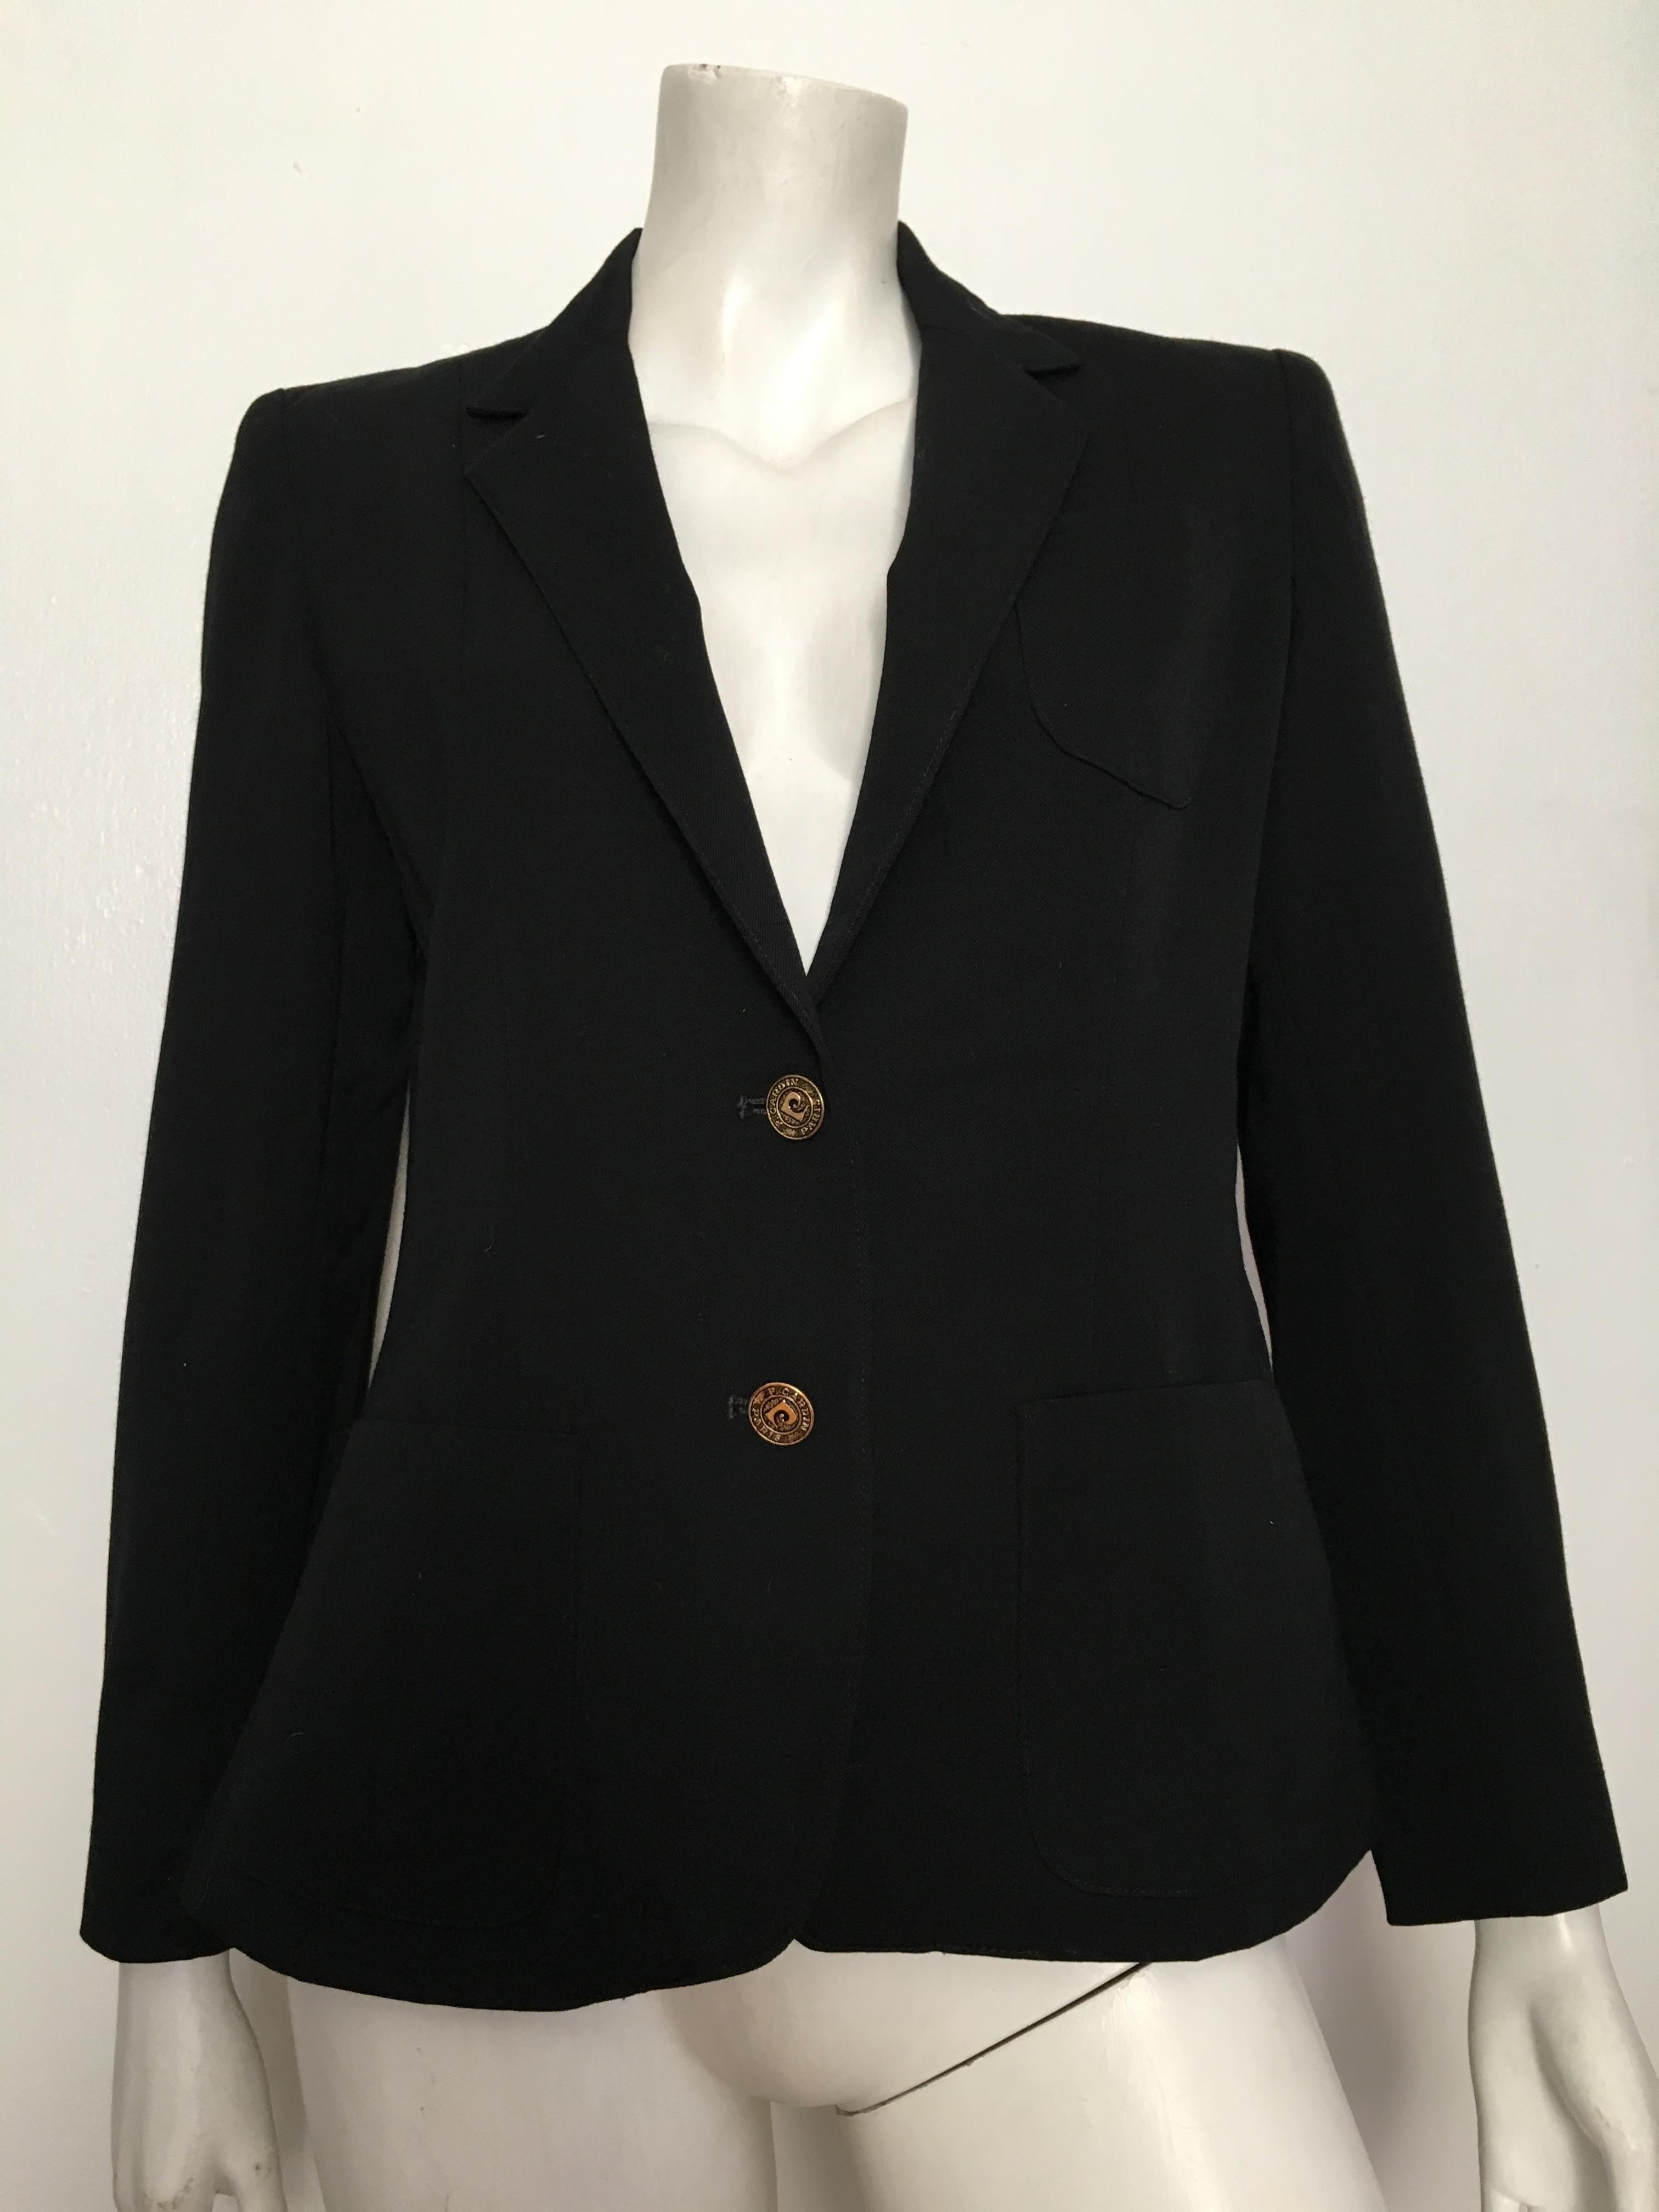 Pierre Cardin 1980s black wool jacket with logo buttons & front pockets is labeled a size 9/10 but fits like a size 6.  Matilda the Mannequin is a size 4 and this jacket is just slightly larger on her so a size 6 will work. Ladies if you are looking